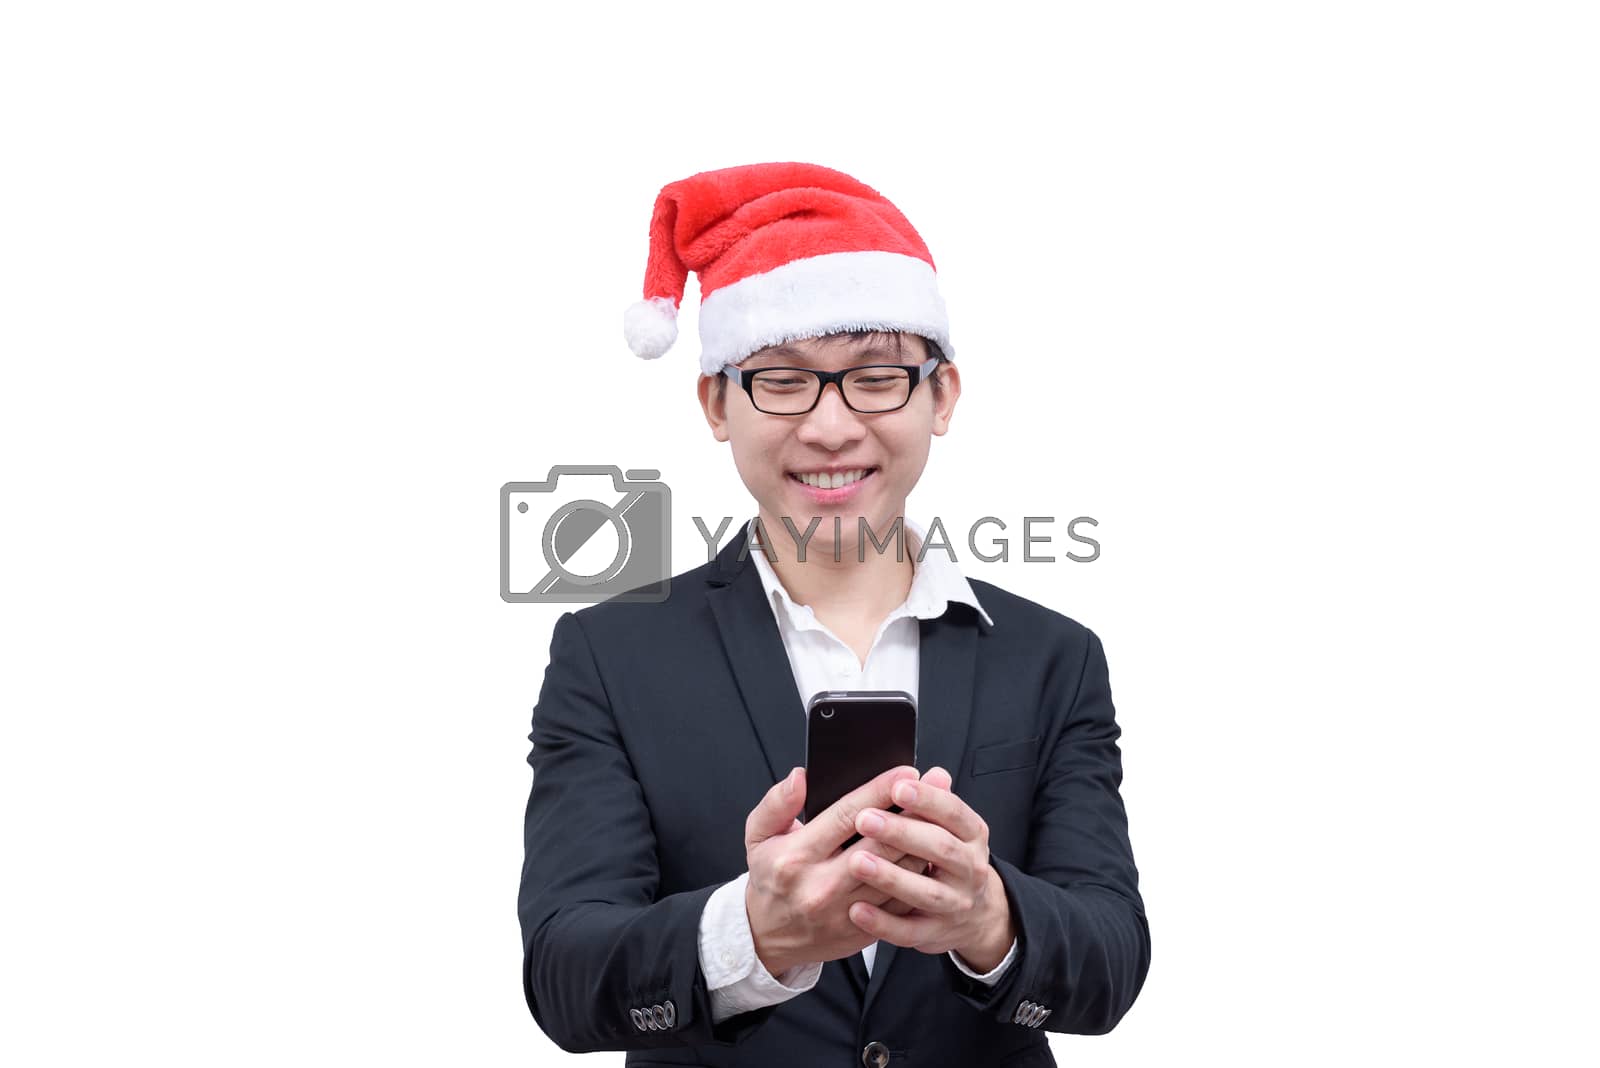 Royalty free image of Business man has mobile playing with Christmas festival themes i by animagesdesign